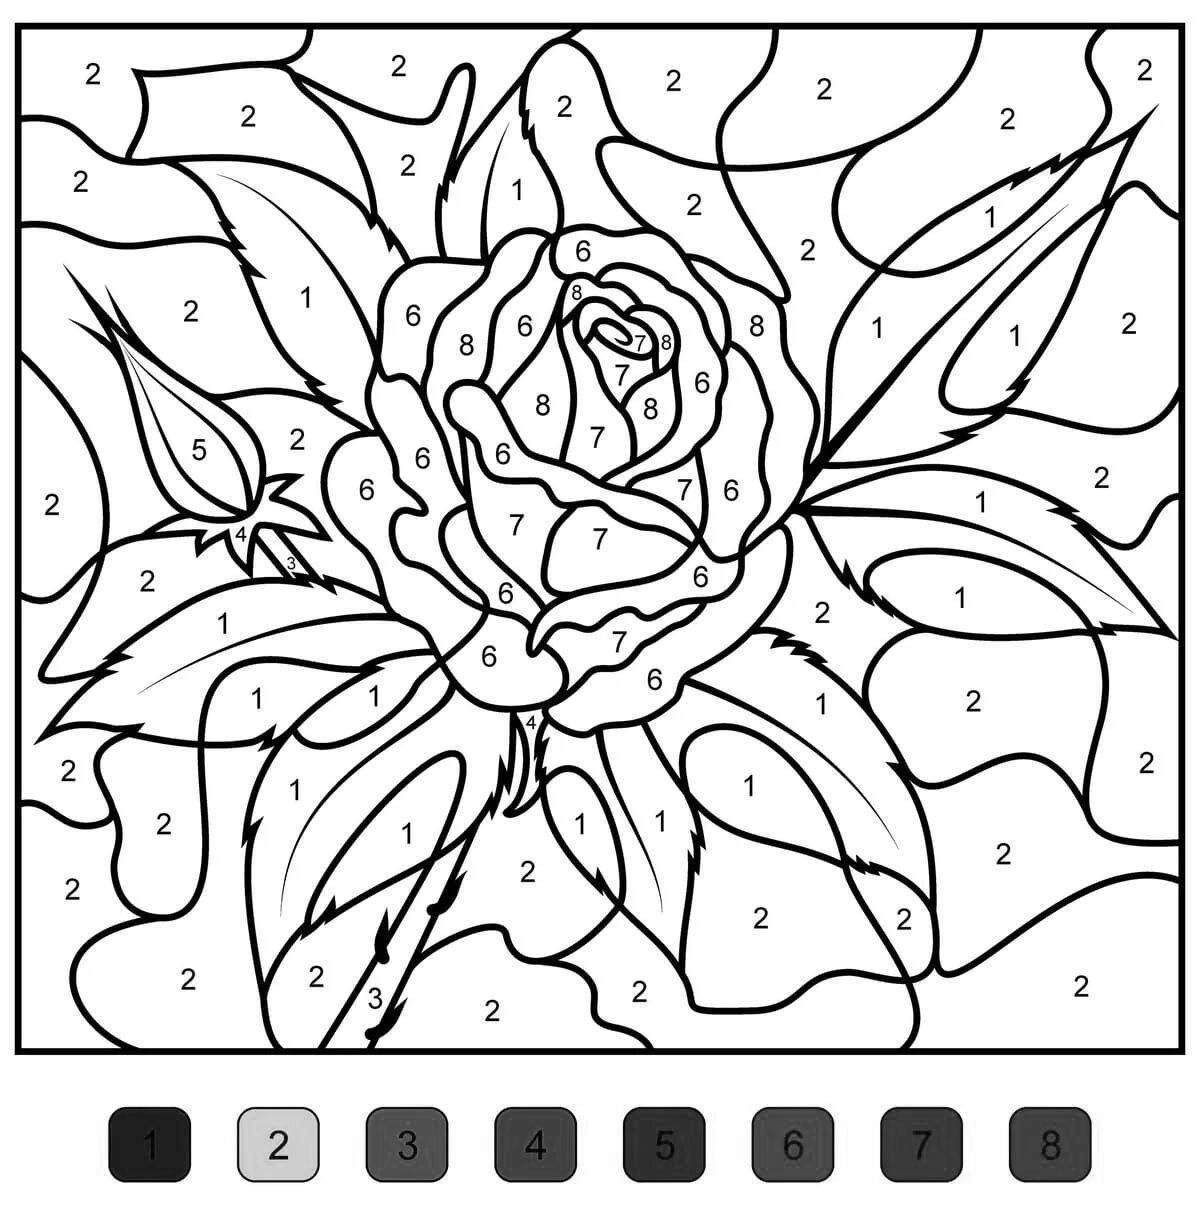 Involving coloring pages by phone numbers in English